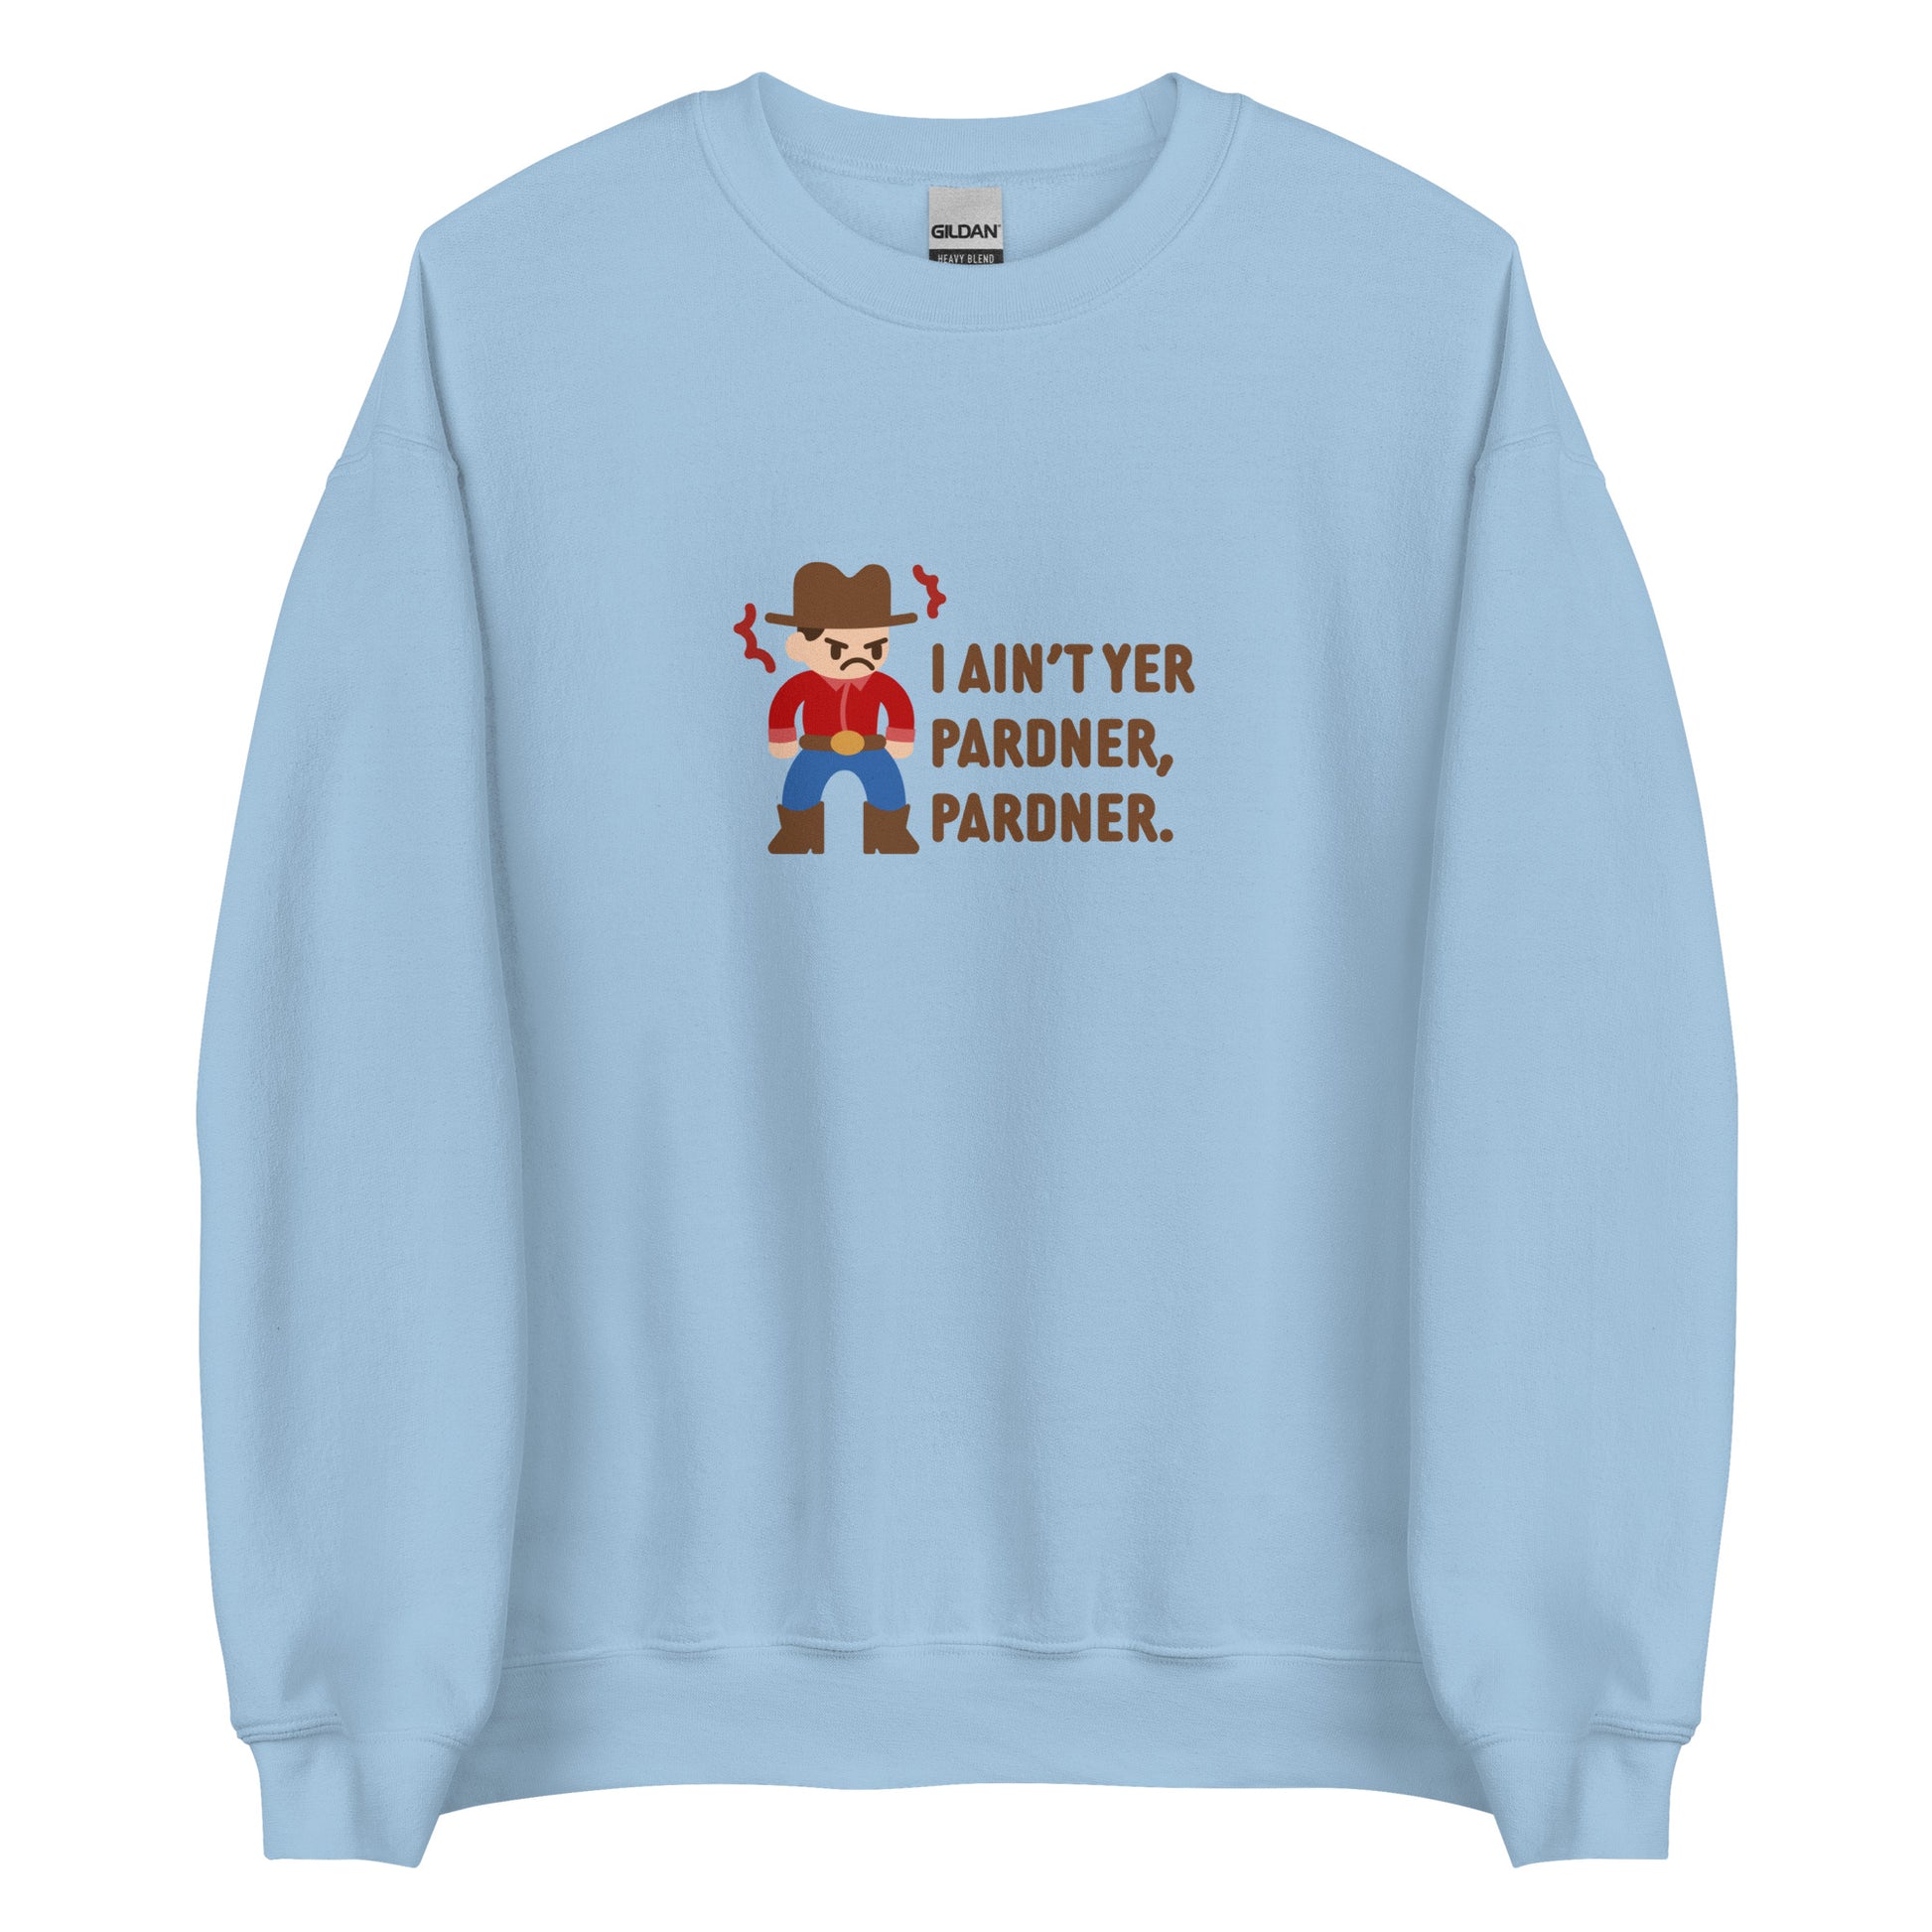 A light blue crewneck sweatshirt featuring an illustration of a grumpy cowboy wearing a red shirt. Text beneath the cowboy reads "I ain't yer pardner, pardner."